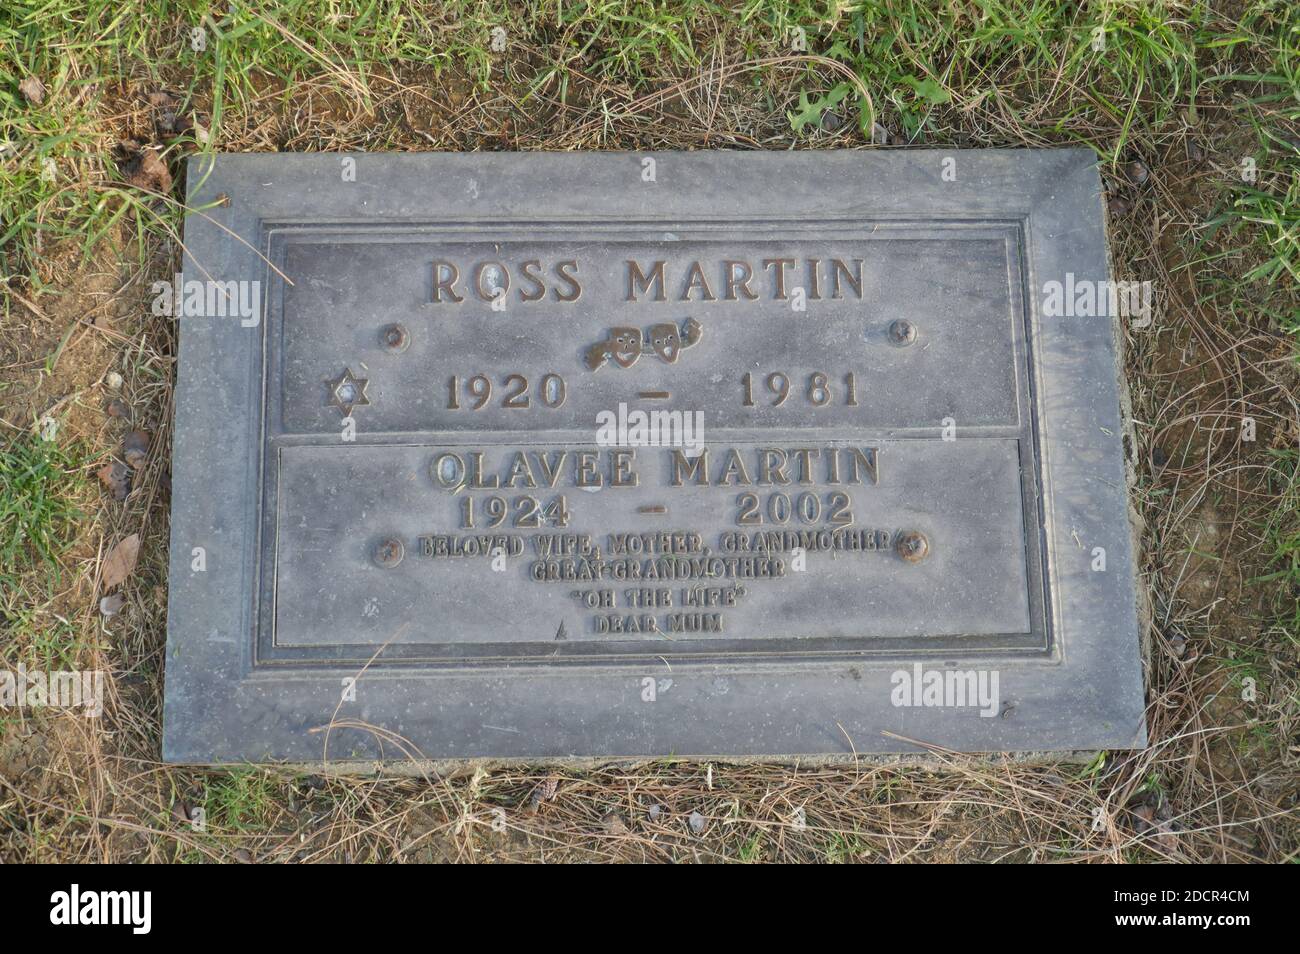 Los Angeles, California, USA 17th November 2020 A general view of atmosphere of actor Ross Martin's Grave at Mount Sinai Cemetery Hollywood Hills on November 17, 2020 in Los Angeles, California, USA. Photo by Barry King/Alamy Stock Photo Stock Photo